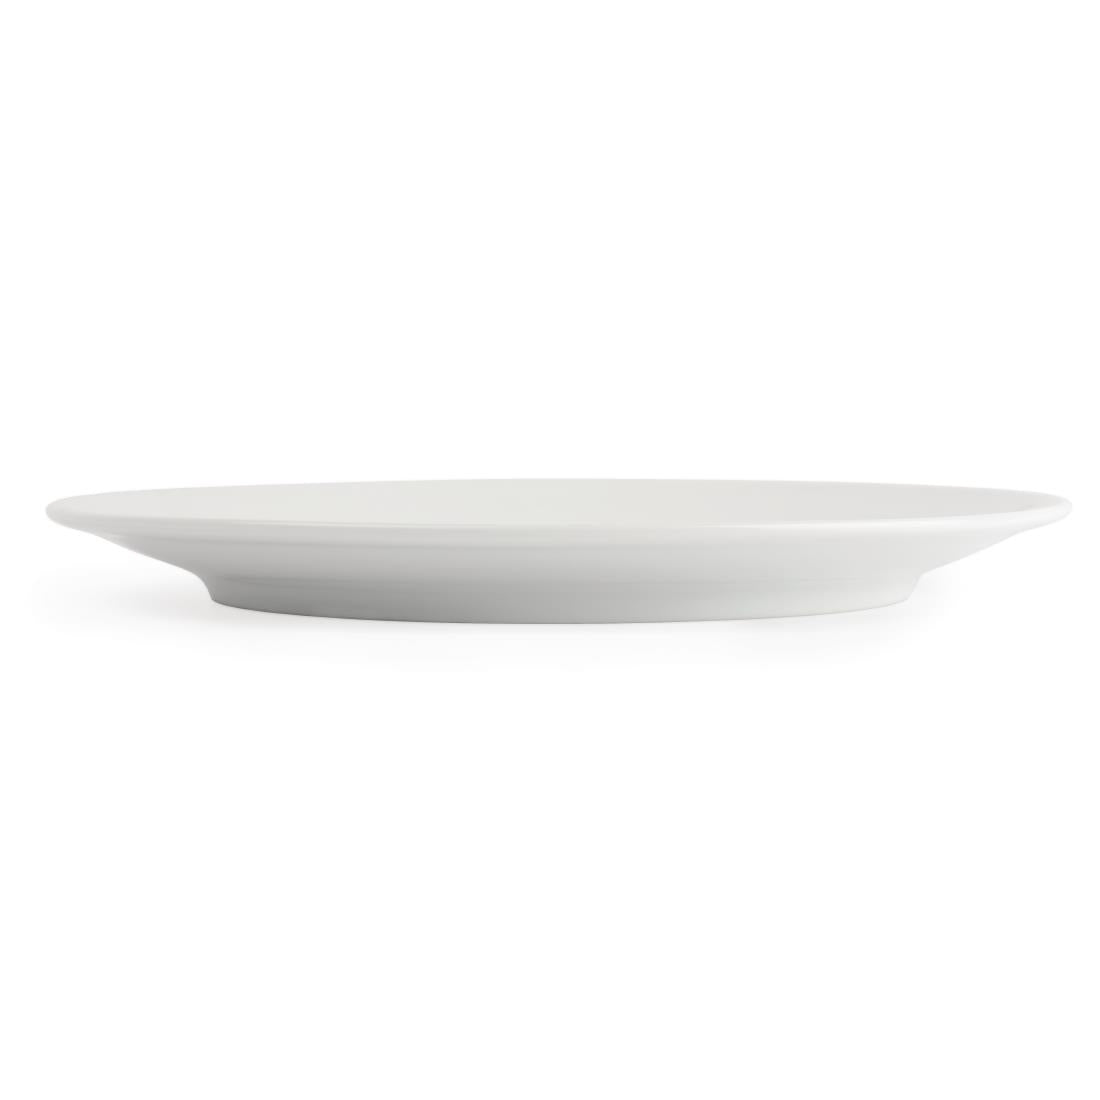 CG004 Royal Porcelain Classic White Coupe Plates 240mm (Pack of 12)